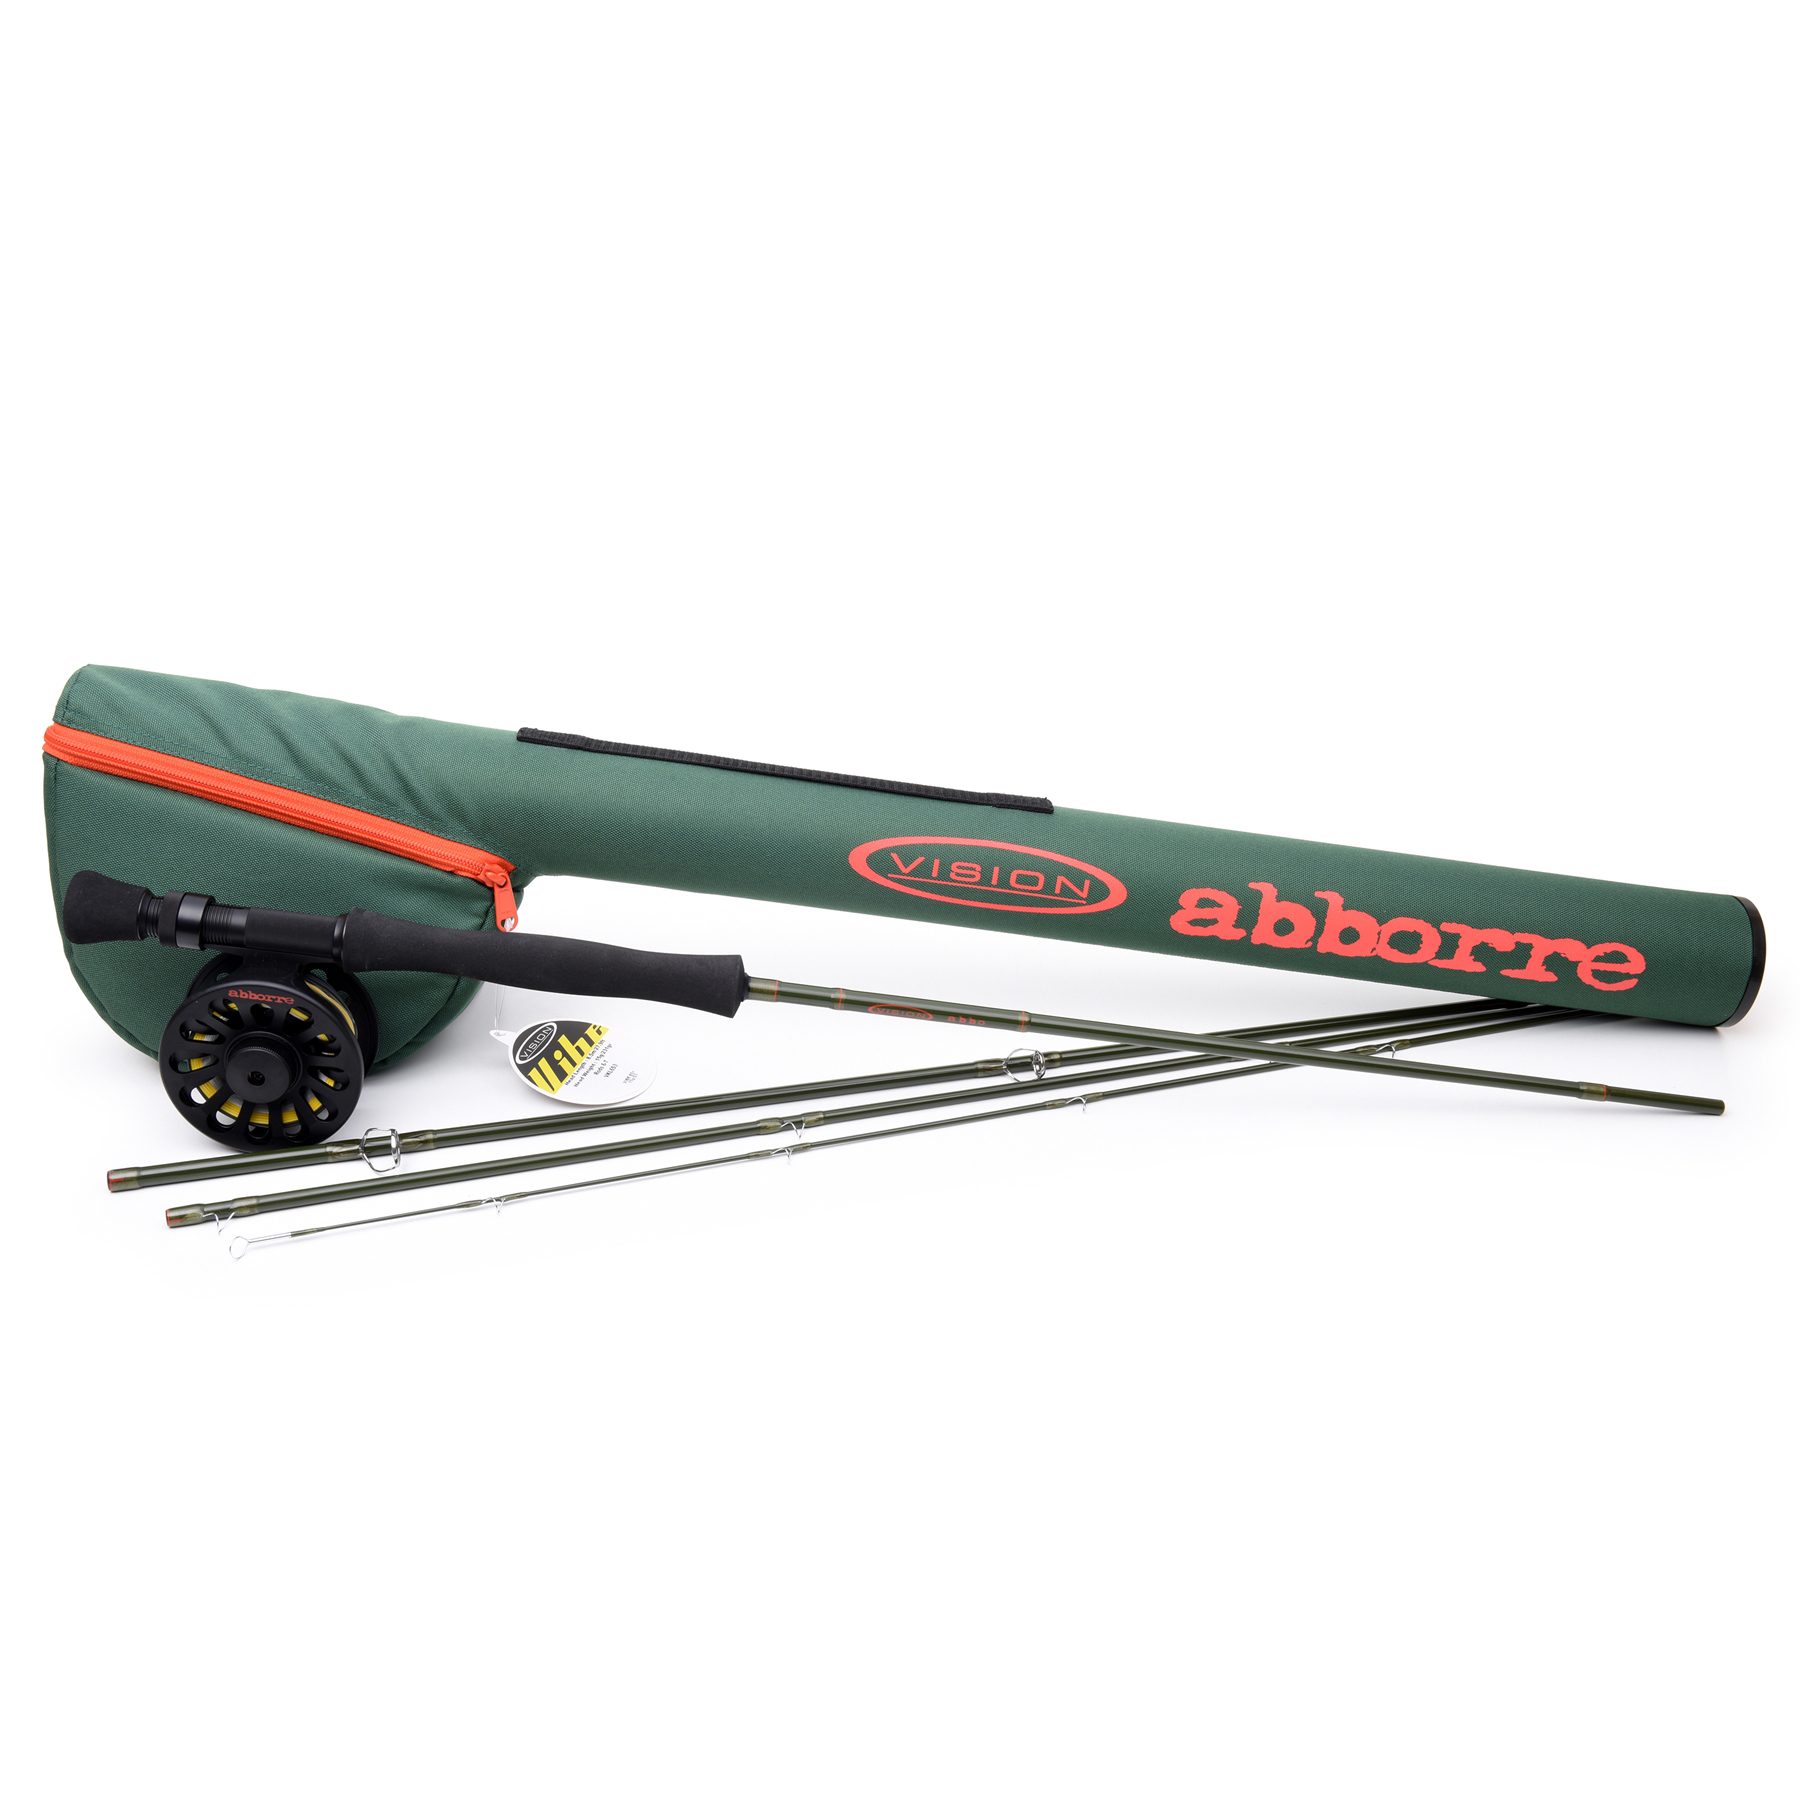 Vision Outfit Abborre Fly Kit 9 Foot #6 For Fly Fishing (Length 9ft / 2.75m)